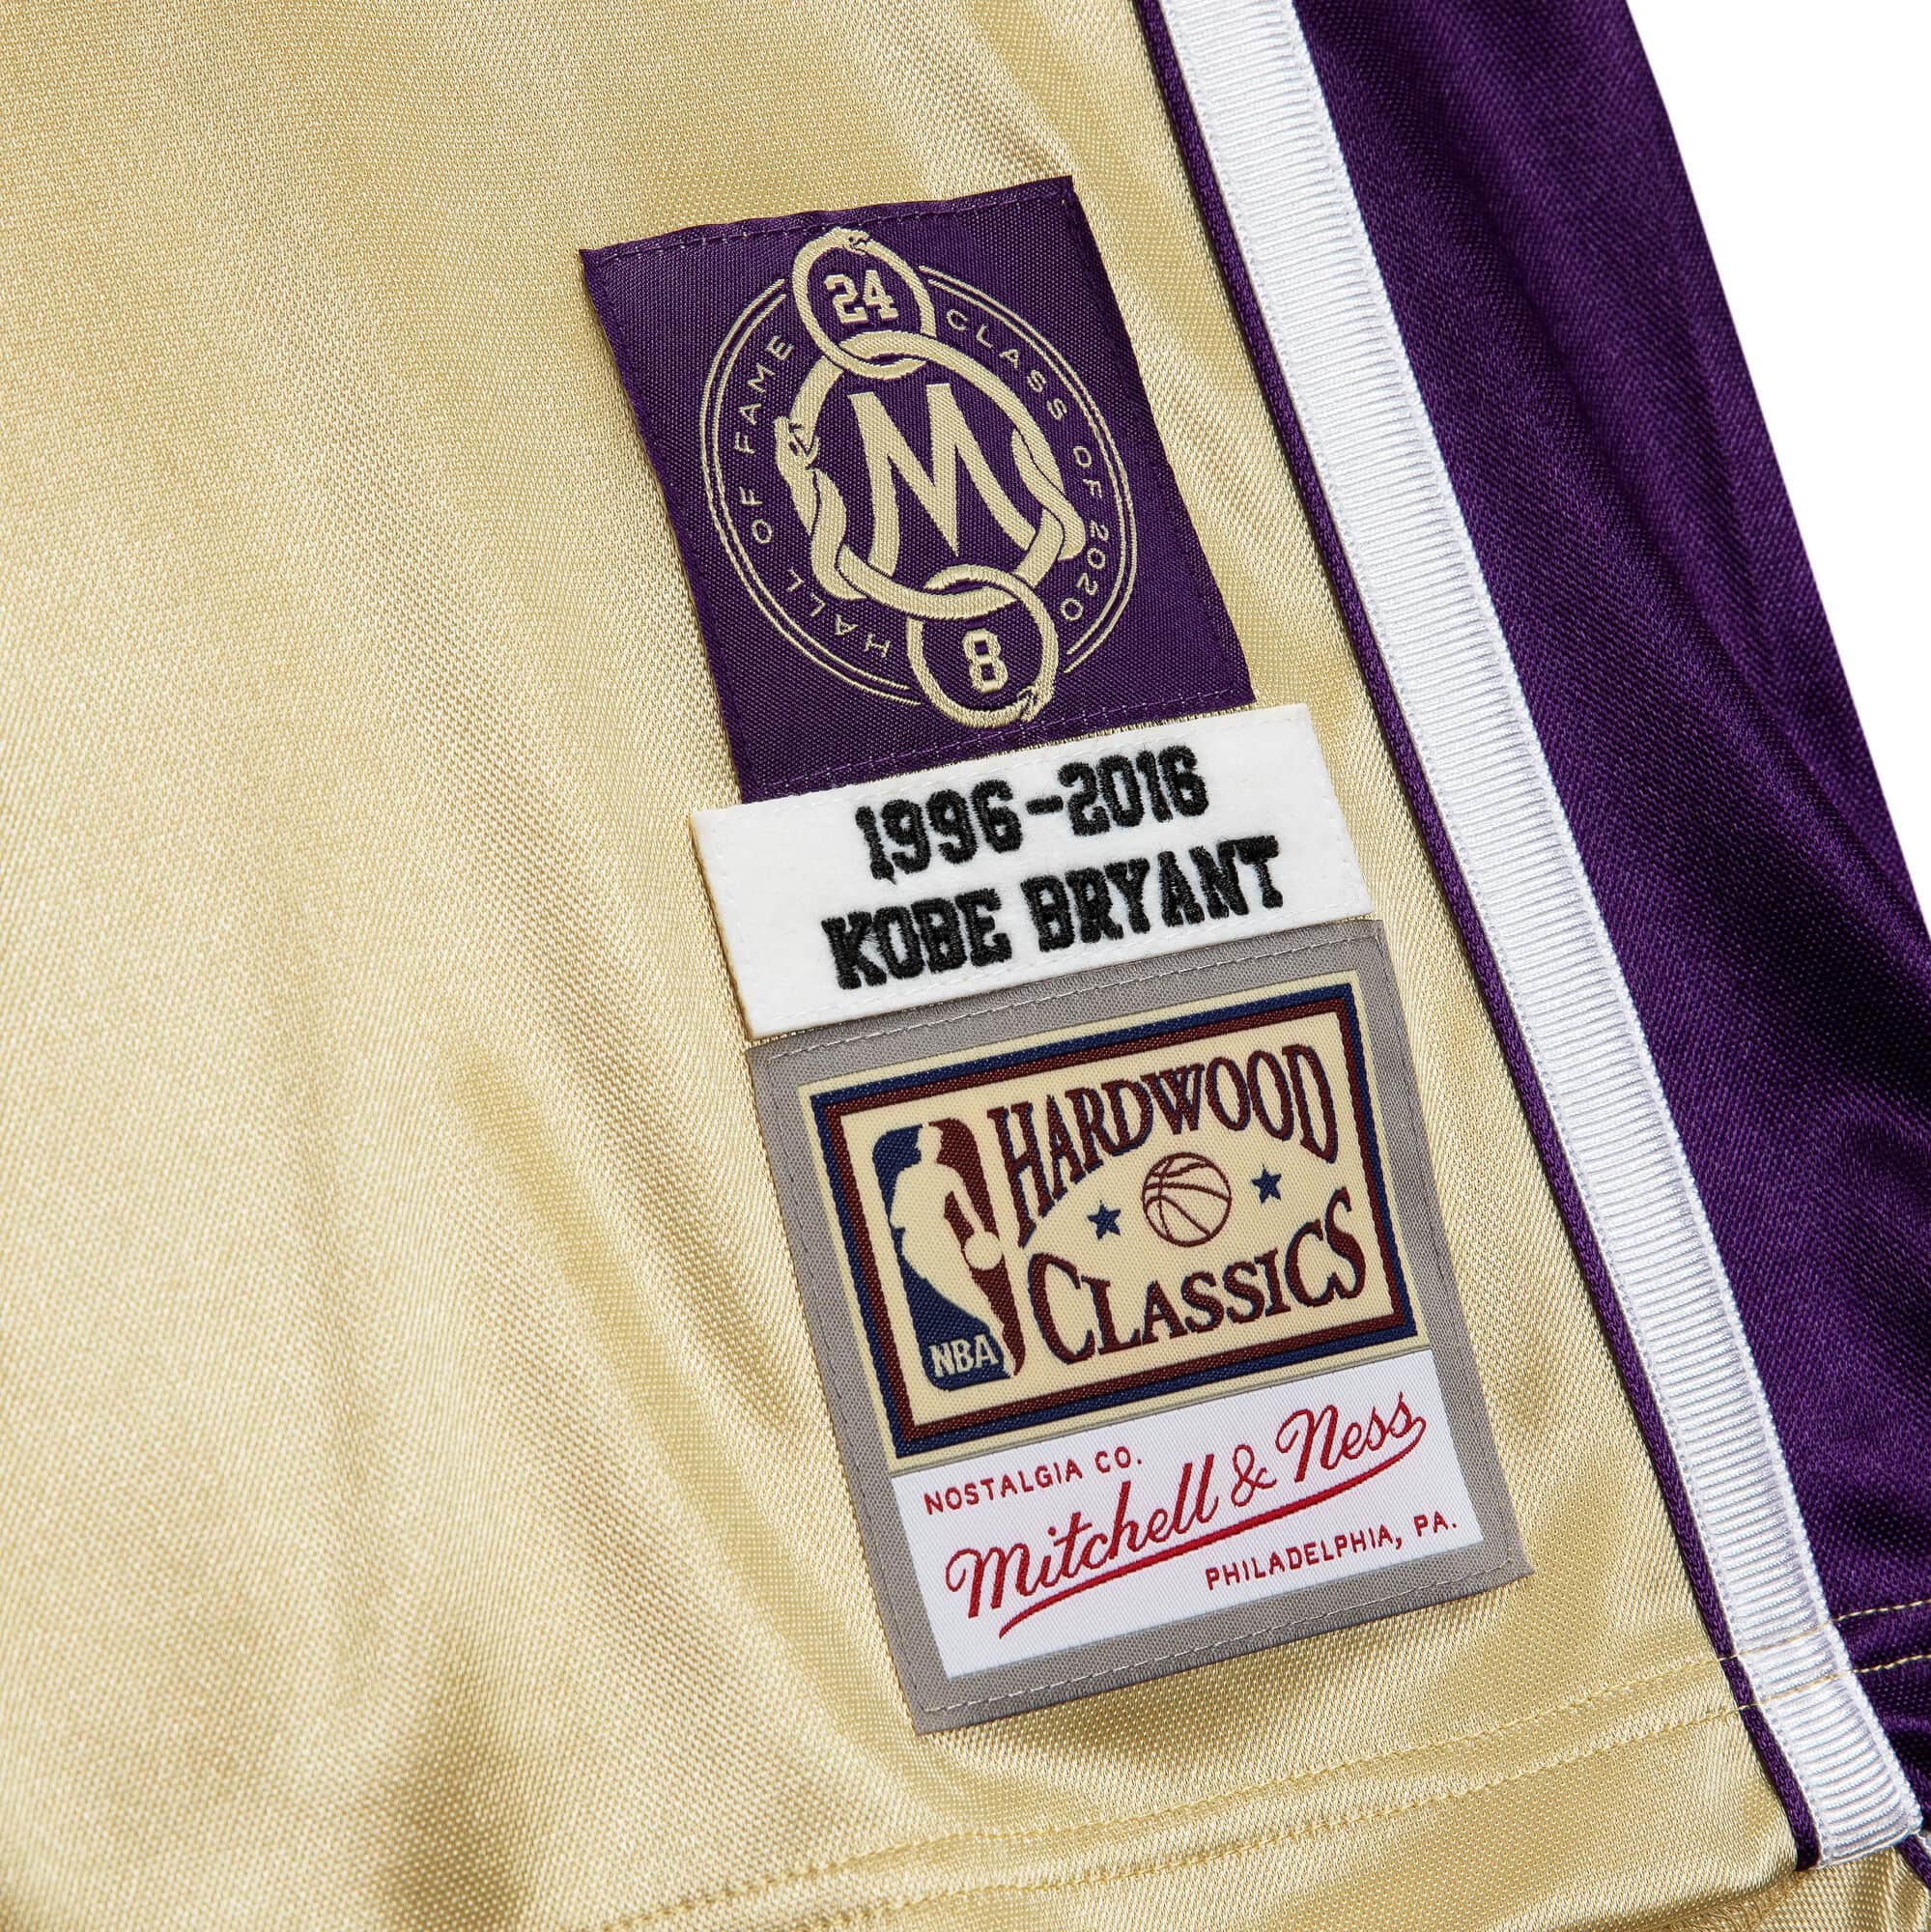 Mitchell &amp; Ness Authentic Hall of Fame #24 Kobe Bryant Los Angeles Lakers 1996-2016 Jersey